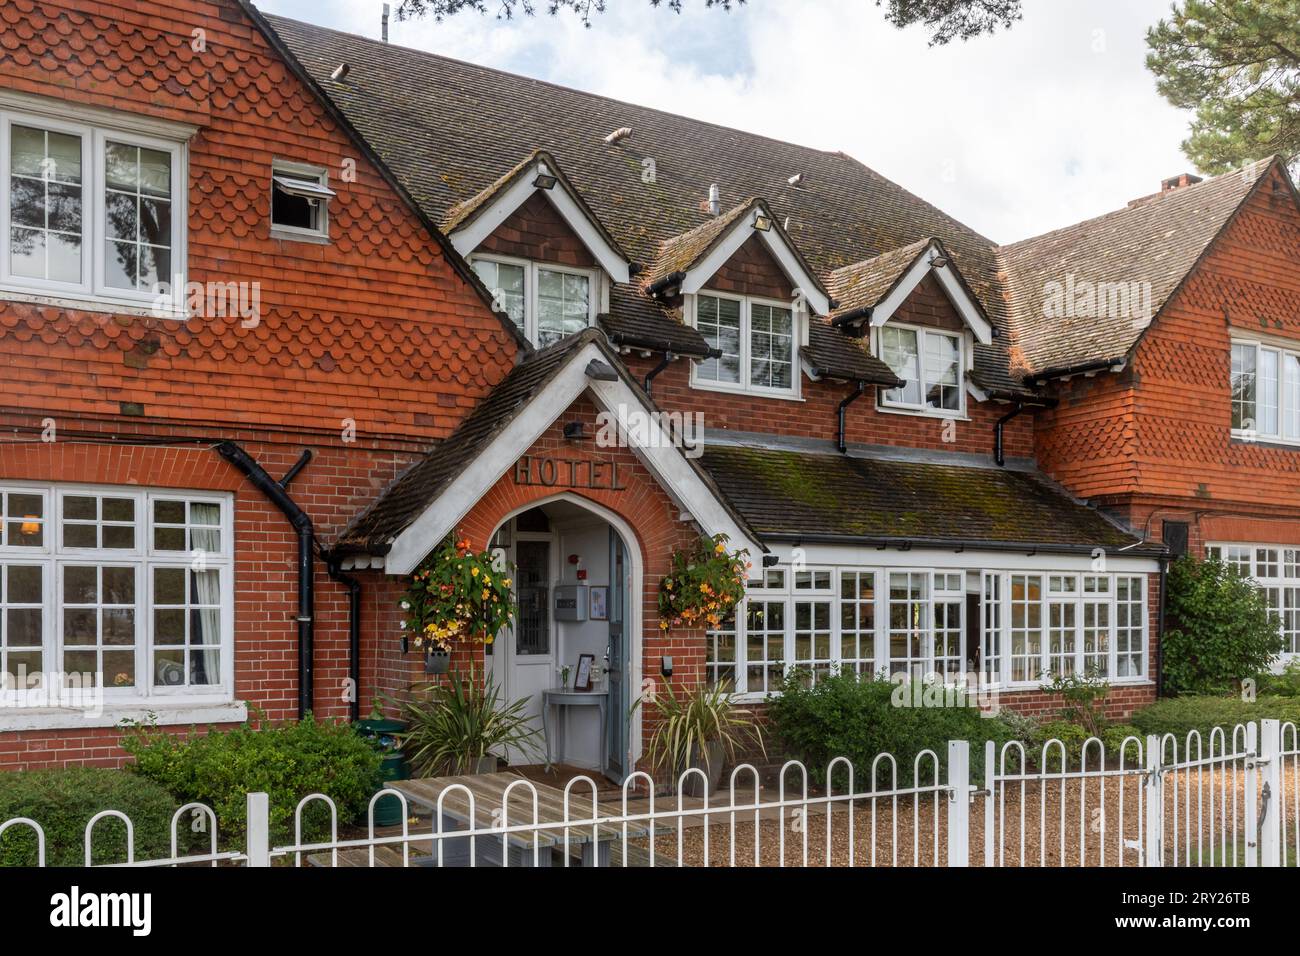 Beaulieu Inn, a country hotel in the New Forest National Park, Hampshire, England, UK Stock Photo